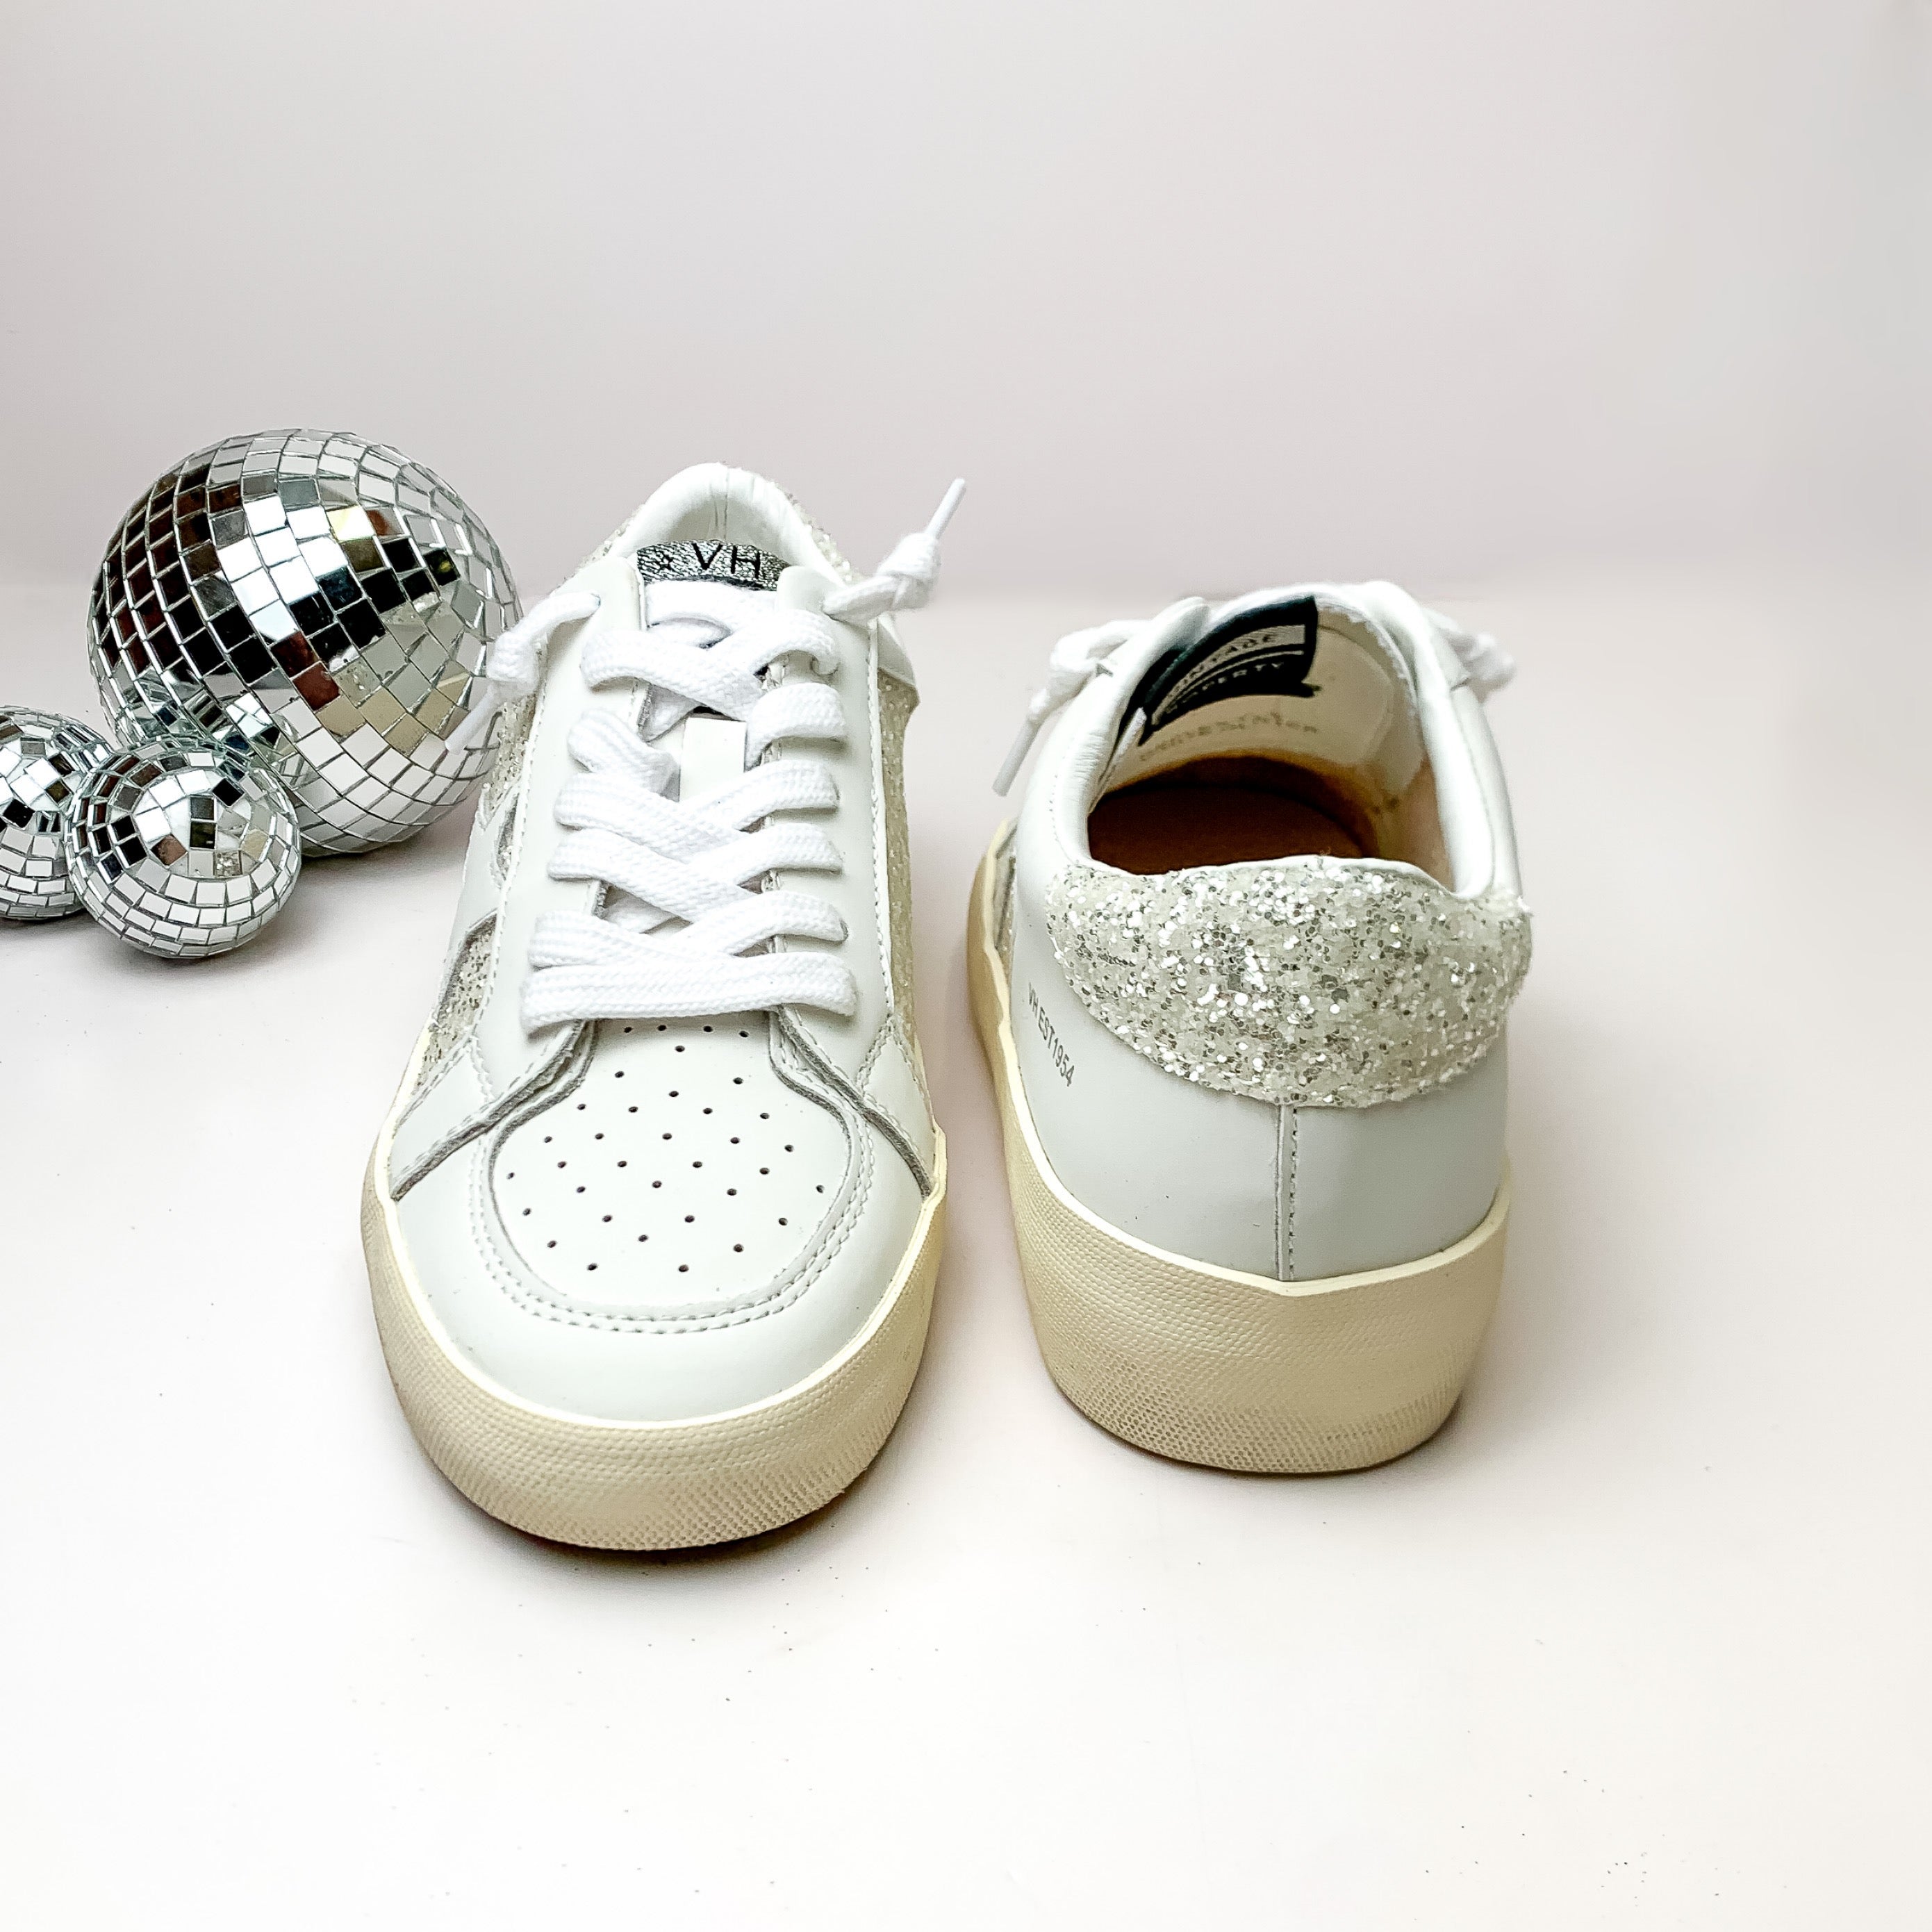 Vintage Havana | Reflex Sneakers in White Glitter - Giddy Up Glamour Boutique